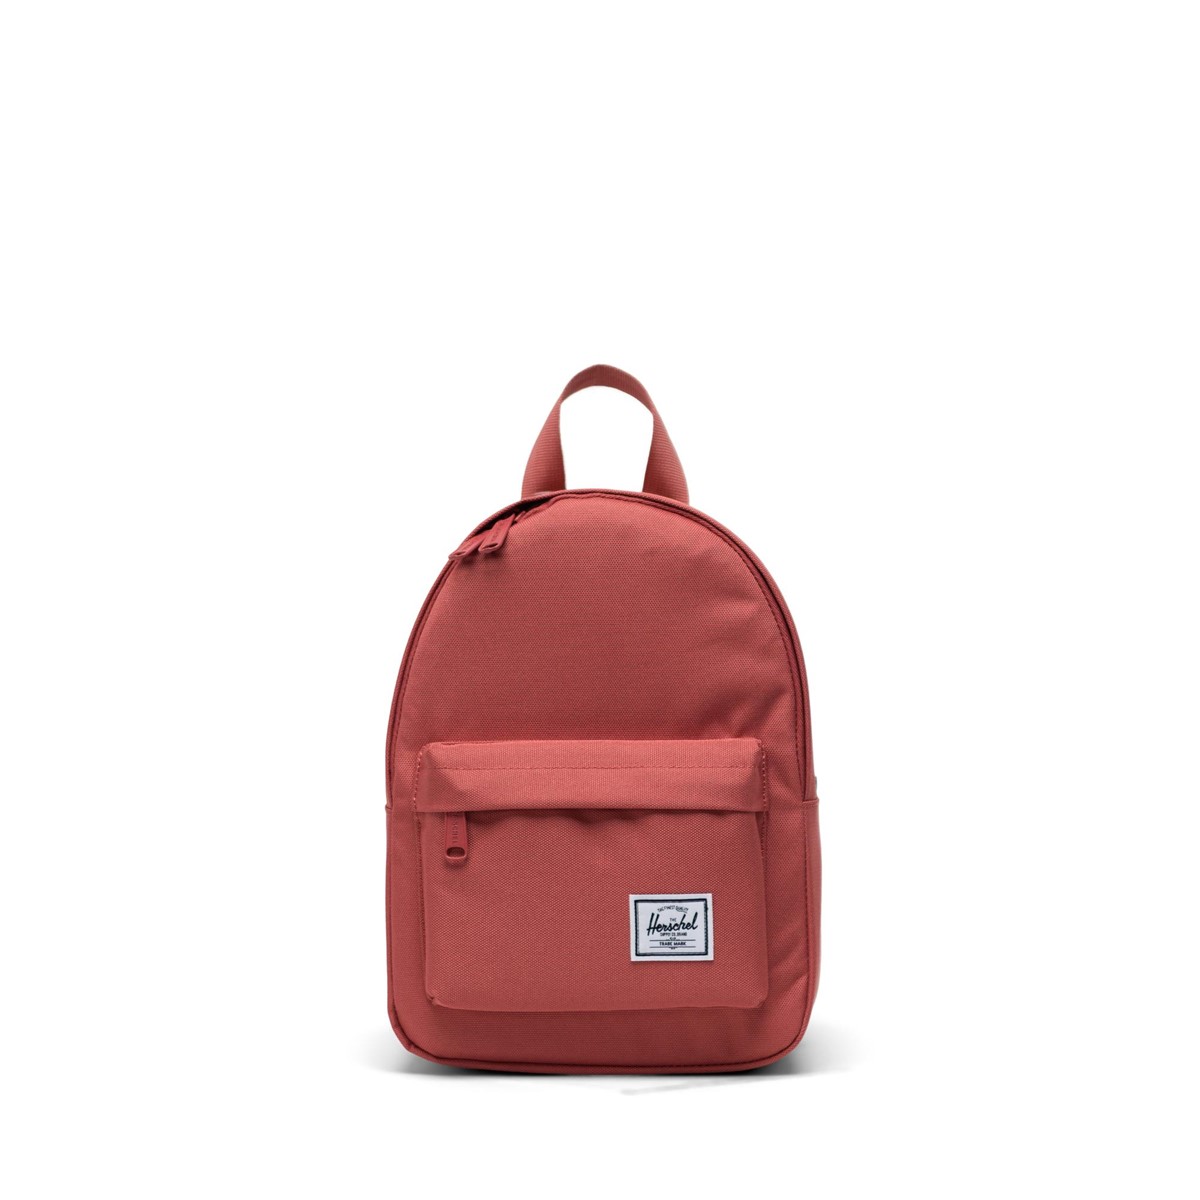 Classic Mini Backpack in Dusty Pink